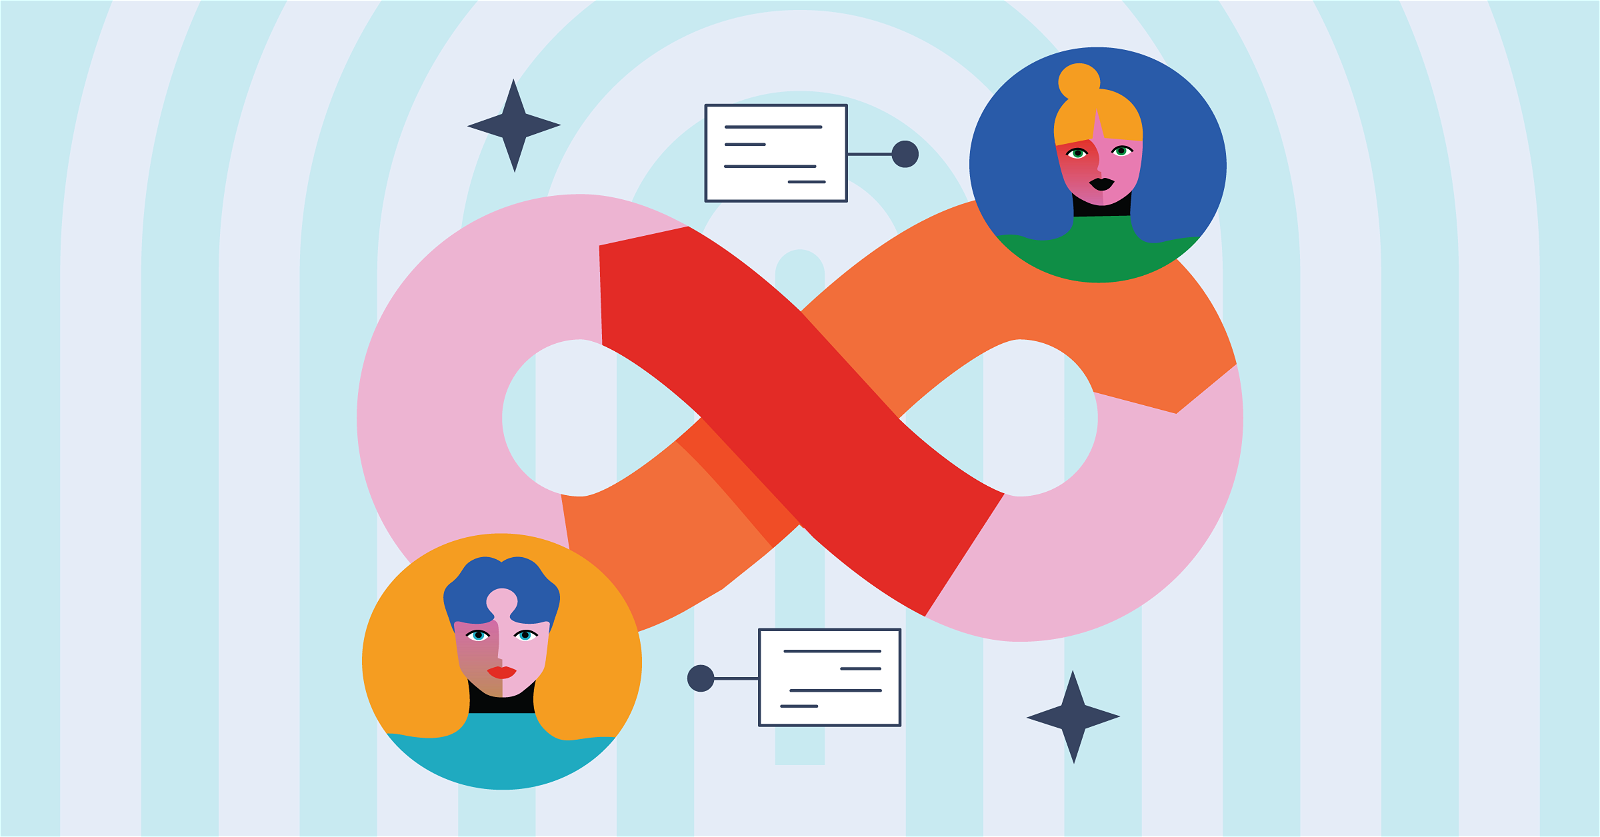 An illustration of an infinity symbol with two stylized female faces, one on each loop. The pink and orange segments symbolize a continuous relationship, highlighting the value of employee retention rate. Small floating documents and star icons surround it against pastel blue and white striped arches.